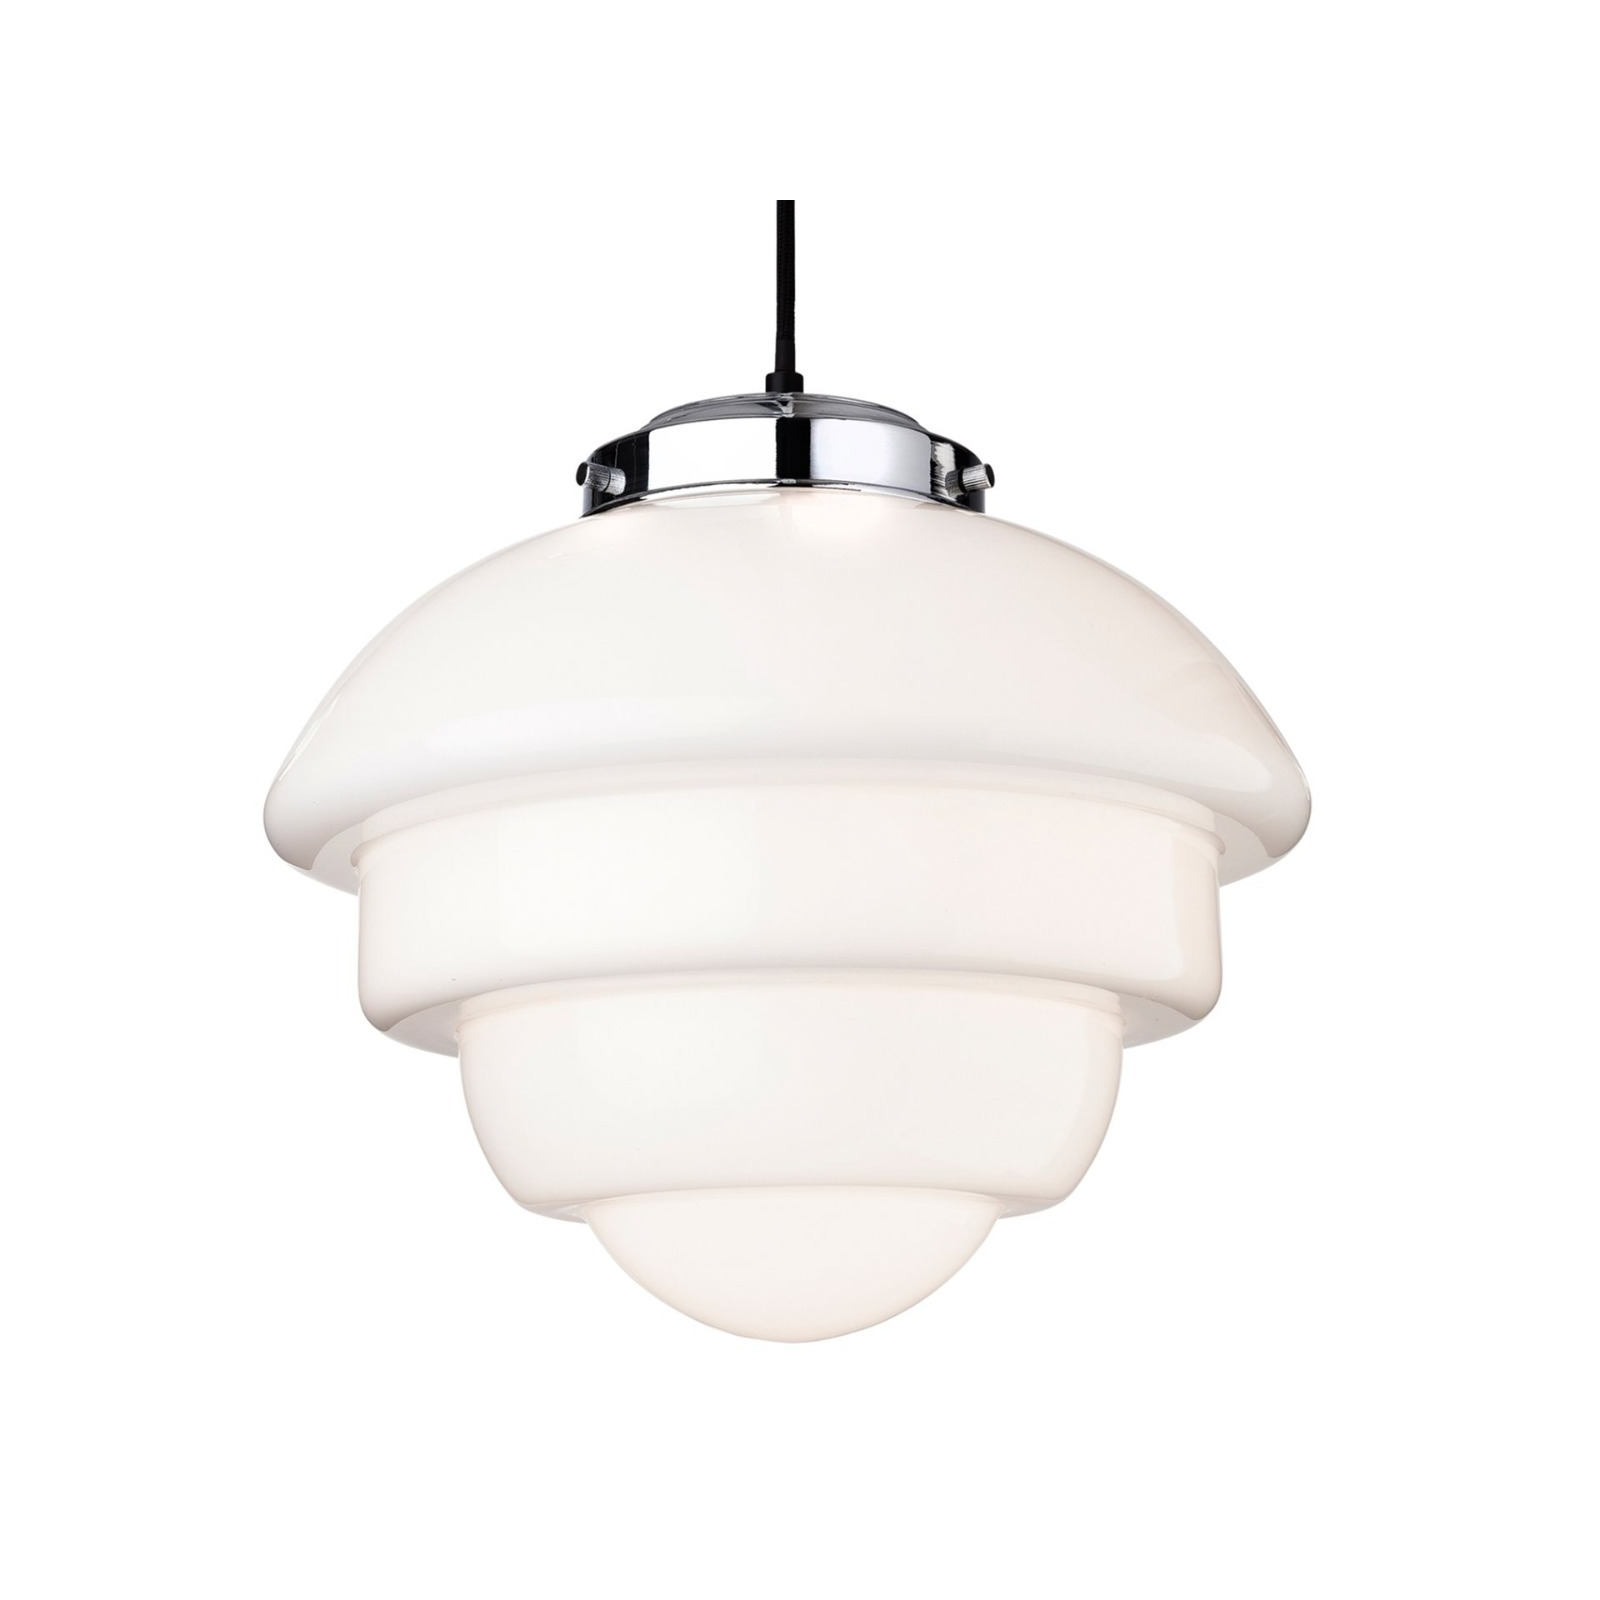 Firstlight 4947CH Art Deco Ceiling Pendant Light In Chrome And Opal White Glass